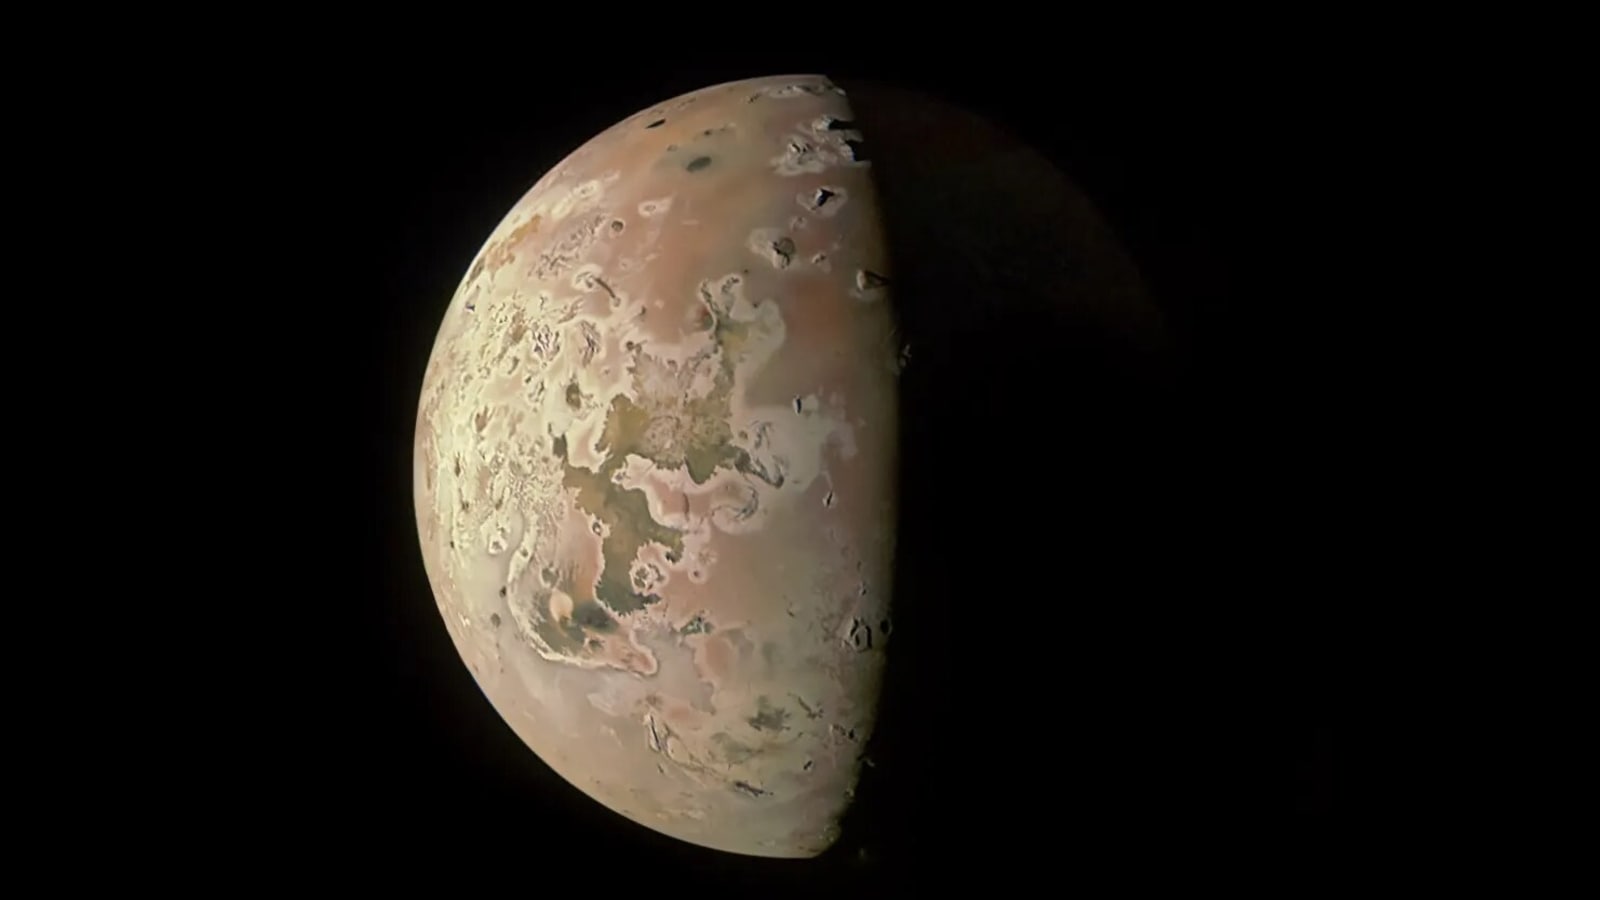 NASA’s Juno spacecraft set for historic encounter with Jupiter’s volcanic moon Io; verify date